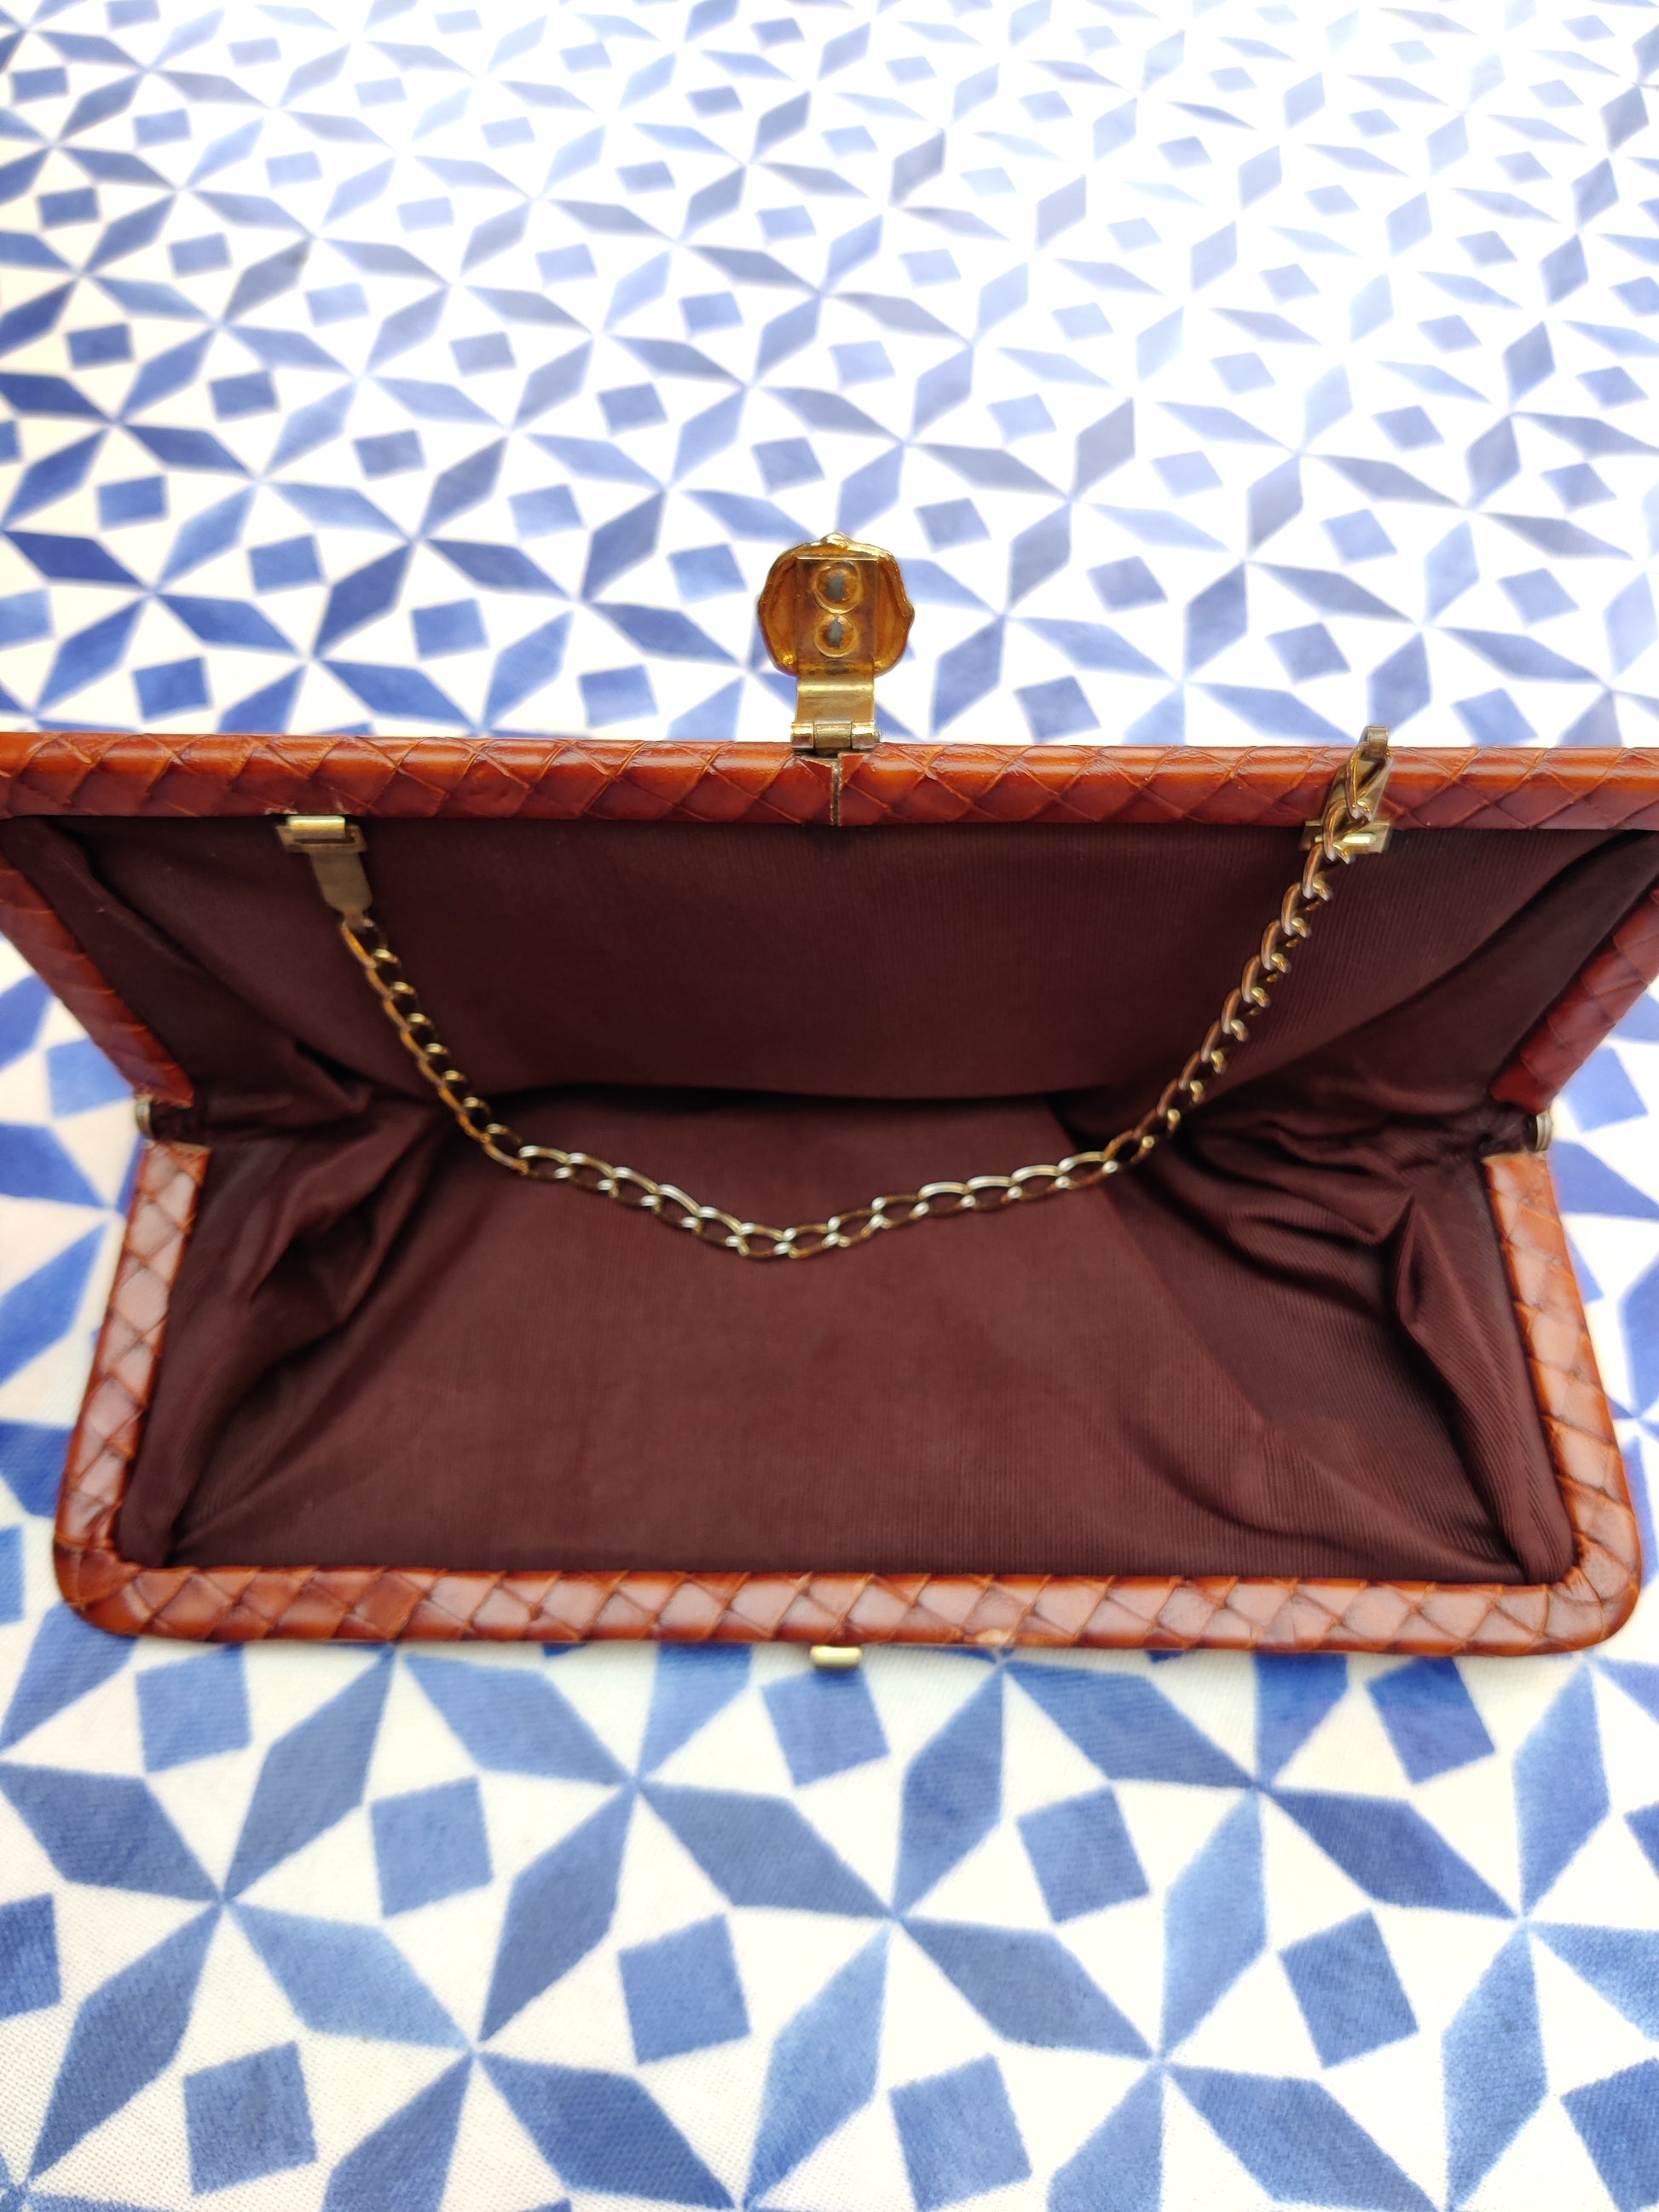 Brown vintage clutch bag with gold clasp